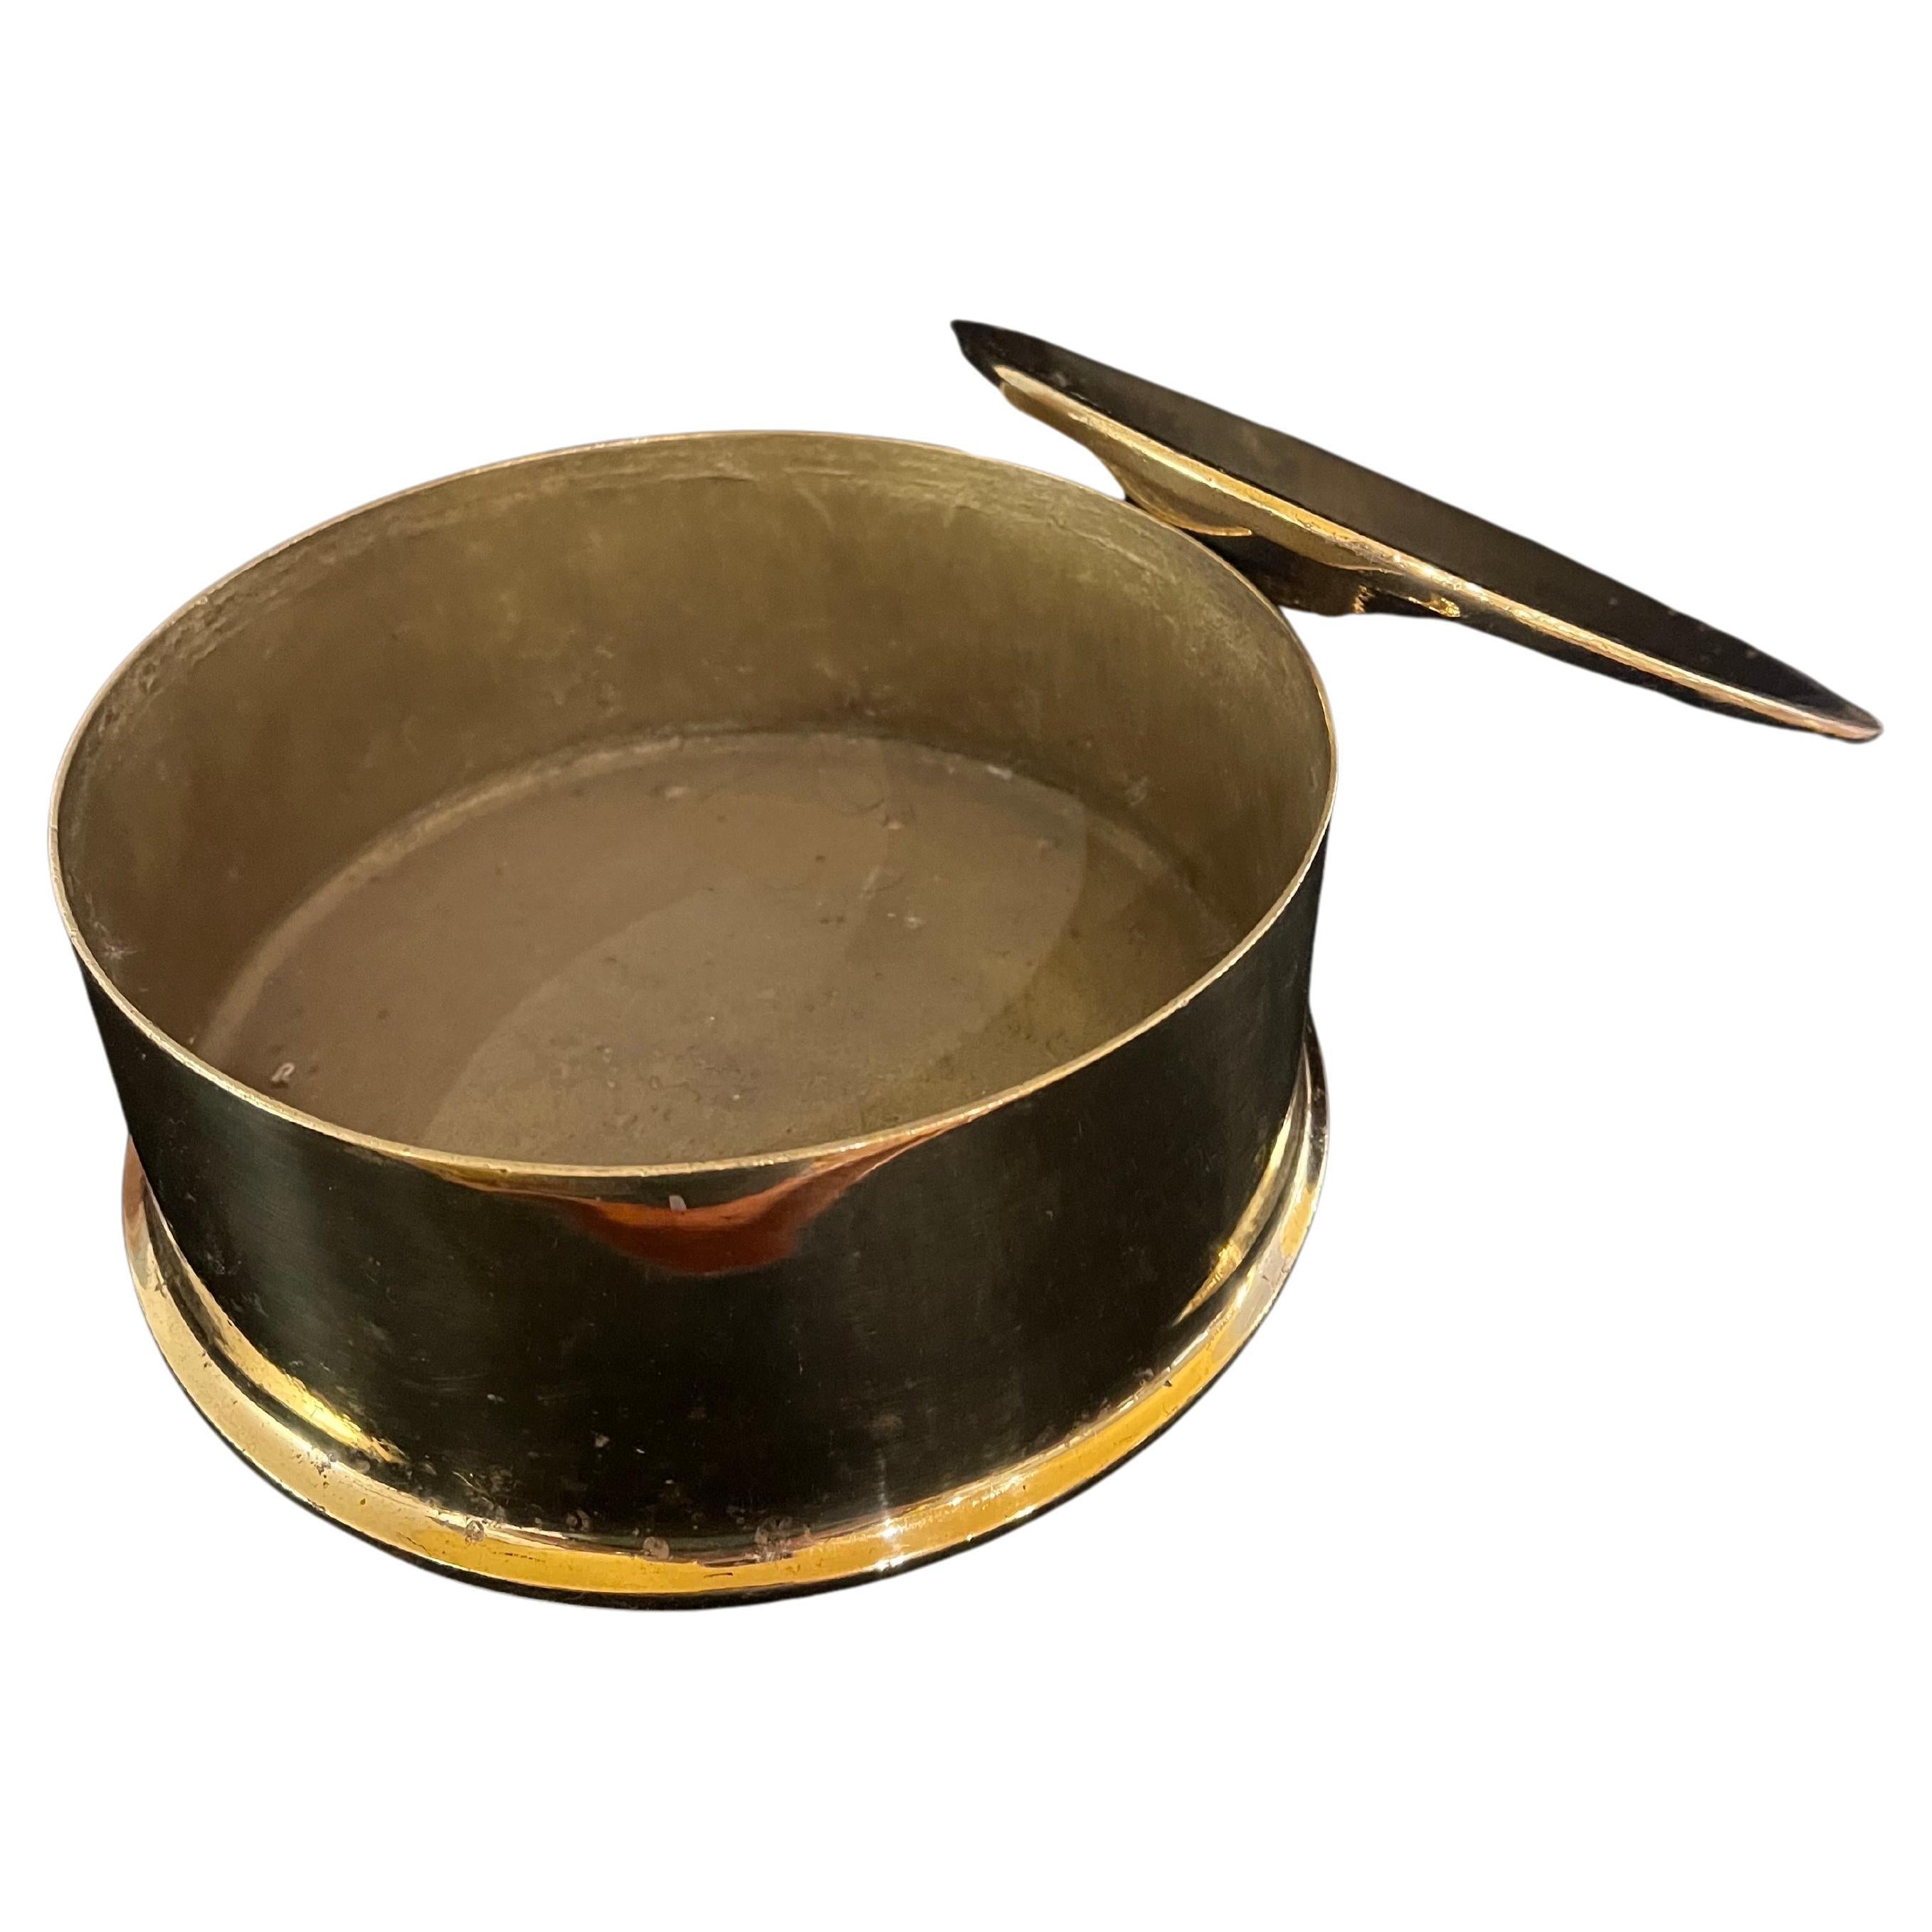 Beautiful and rare solid bronze spittoon / Pipe ashtray , manufactured by Albert Pick & Company Chicago circa 1940's nice solid and heavy beautiful decor piece with removable top professionally polished .